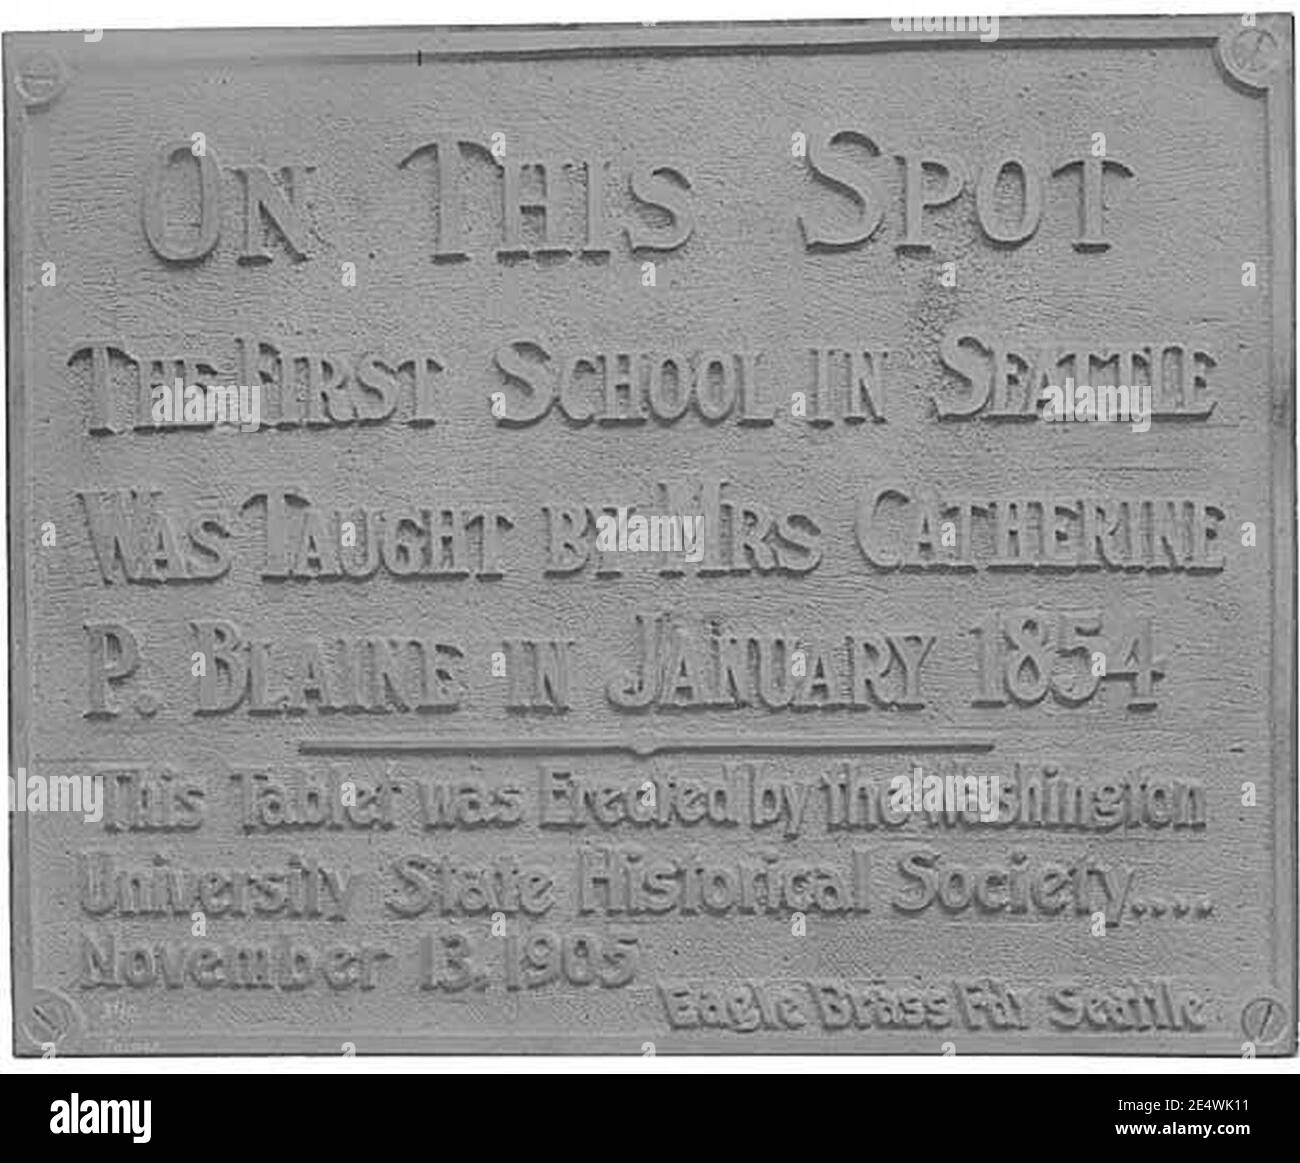 Memorial tablet for the first school in Seattle, ca 1905 (PEISER 87). Stock Photo